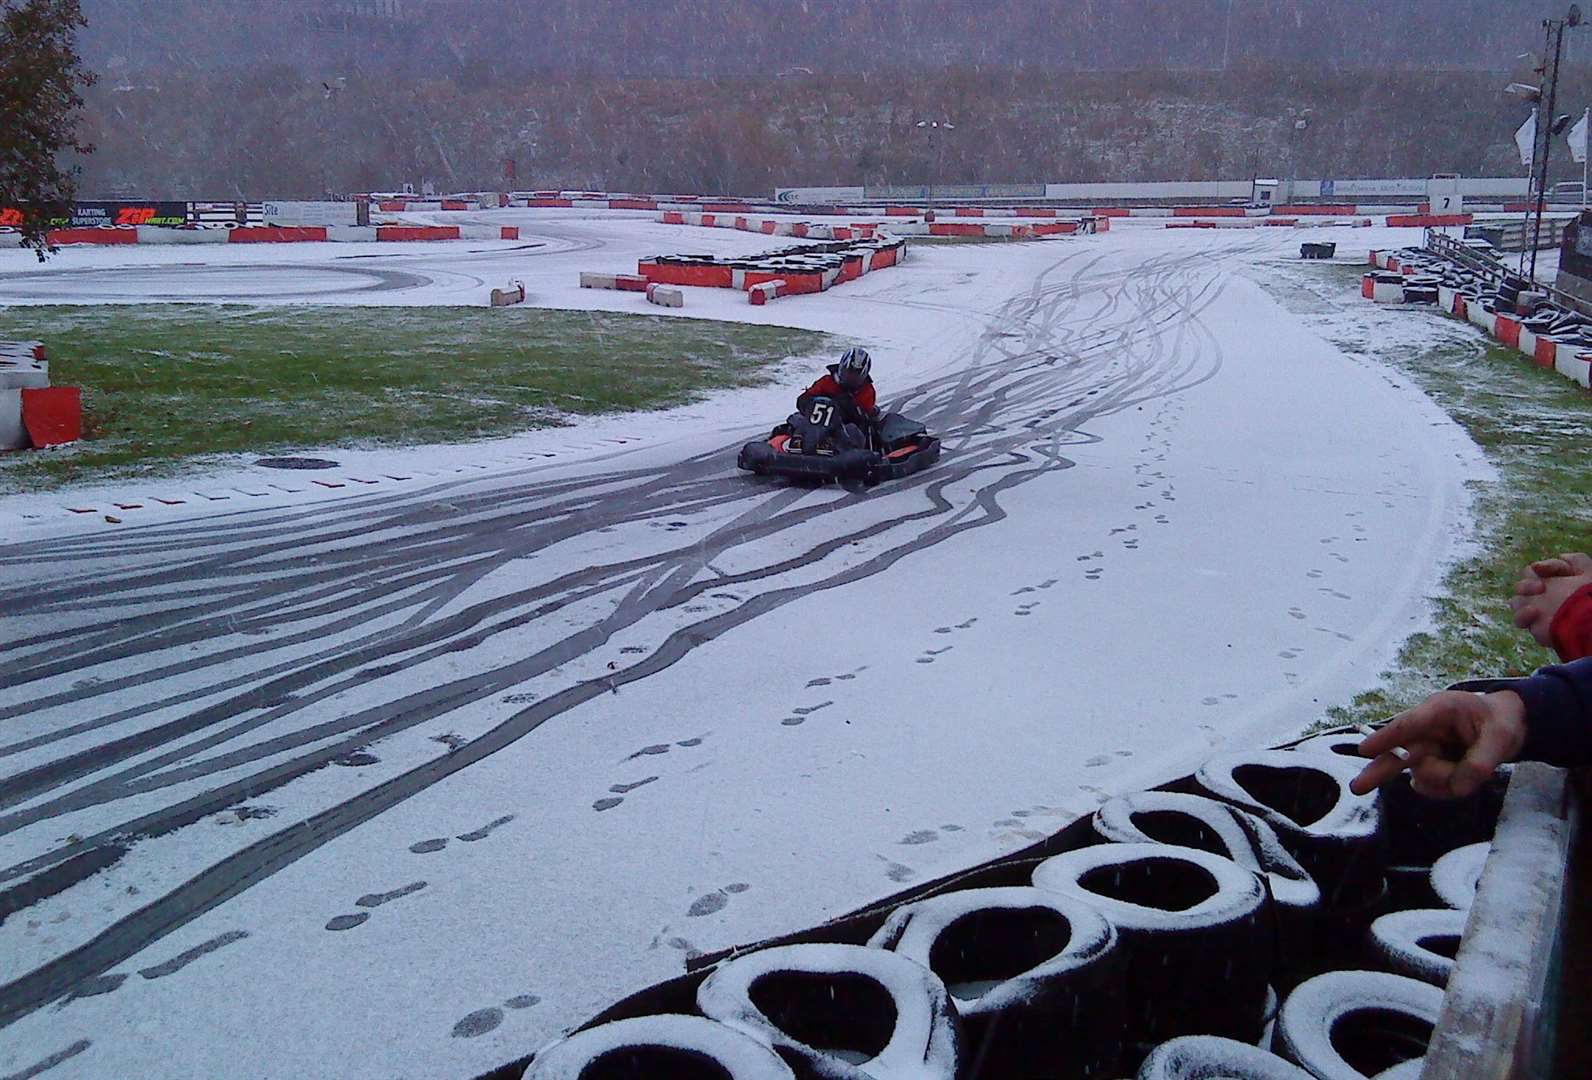 The circuit, pictured in November 2008, operated in all but the most extreme weather